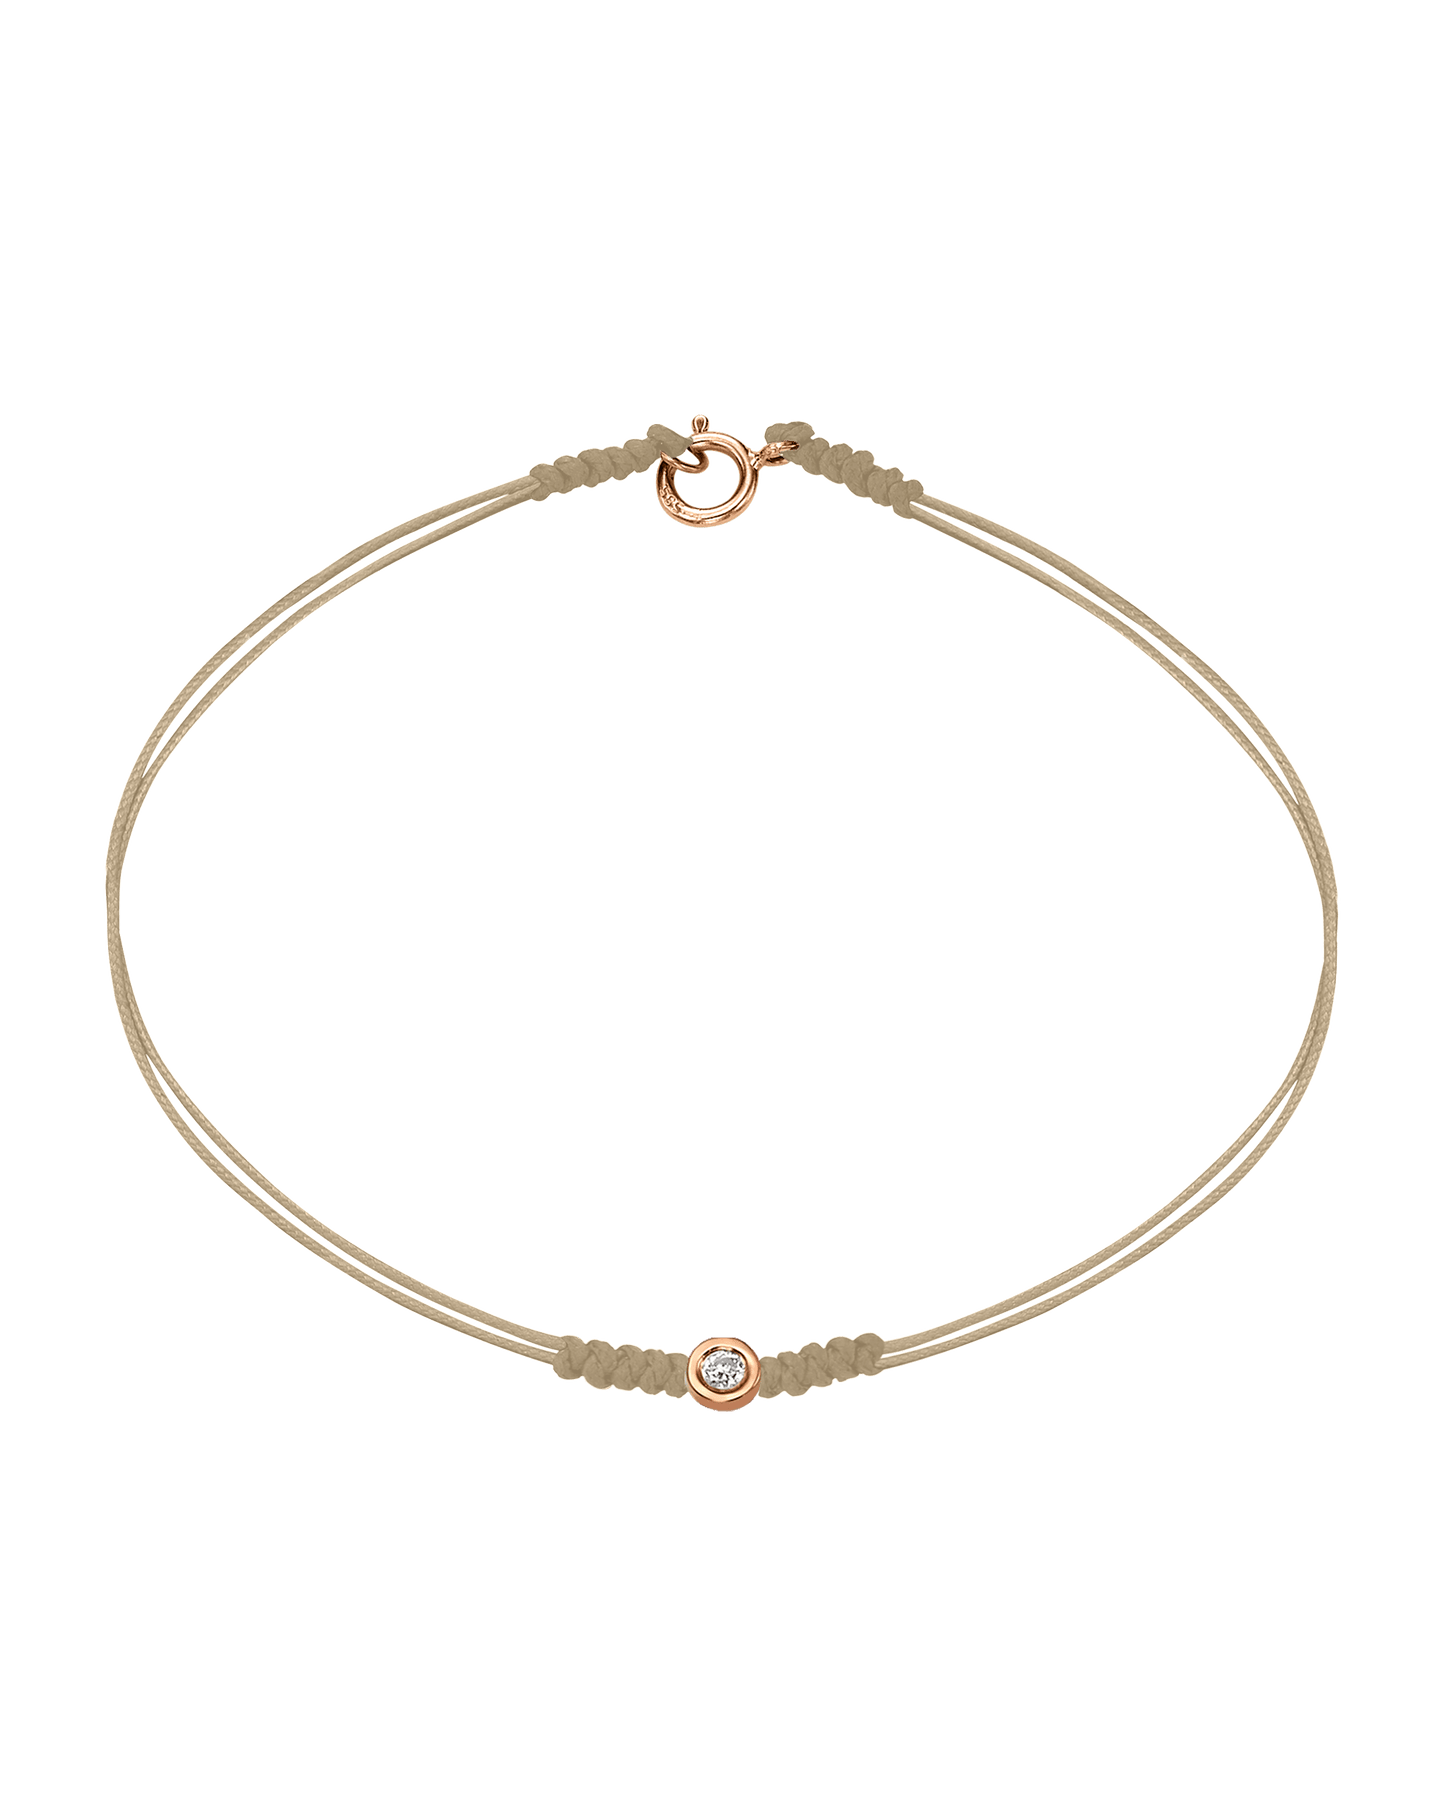 The Classic String of Love with clasp - 14K Rose Gold Bracelets 14K Solid Gold Beige Small: 0.03ct Small - 6 Inches (15.5cm)